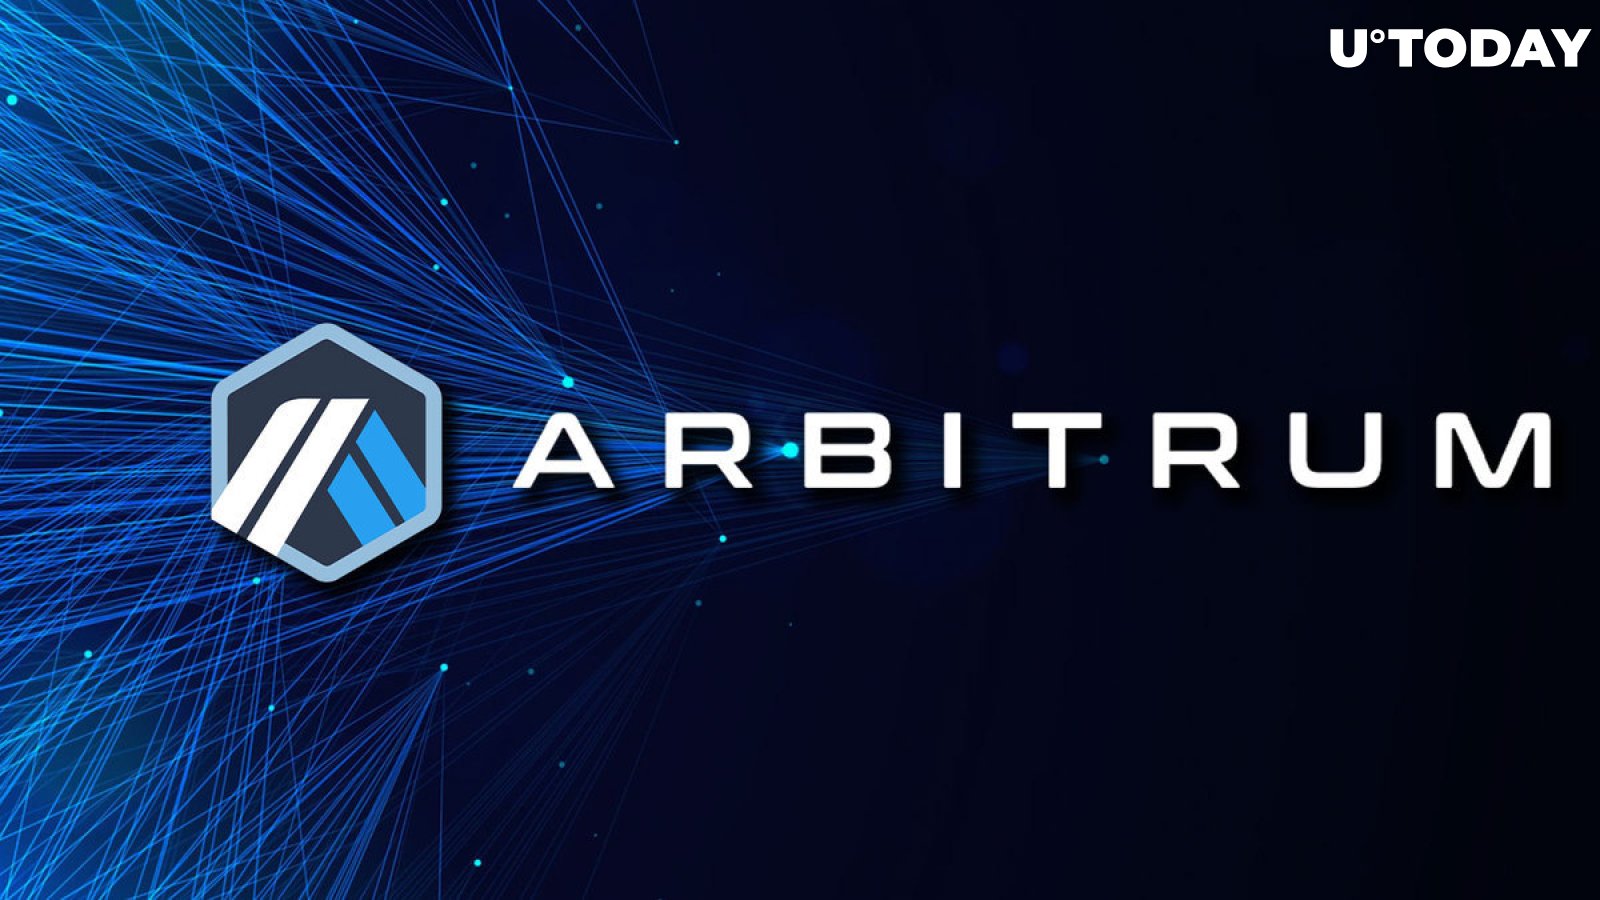 Arbitrum Becomes Fourth Biggest Chain on Eve of Long-Awaited ARBI Airdrop